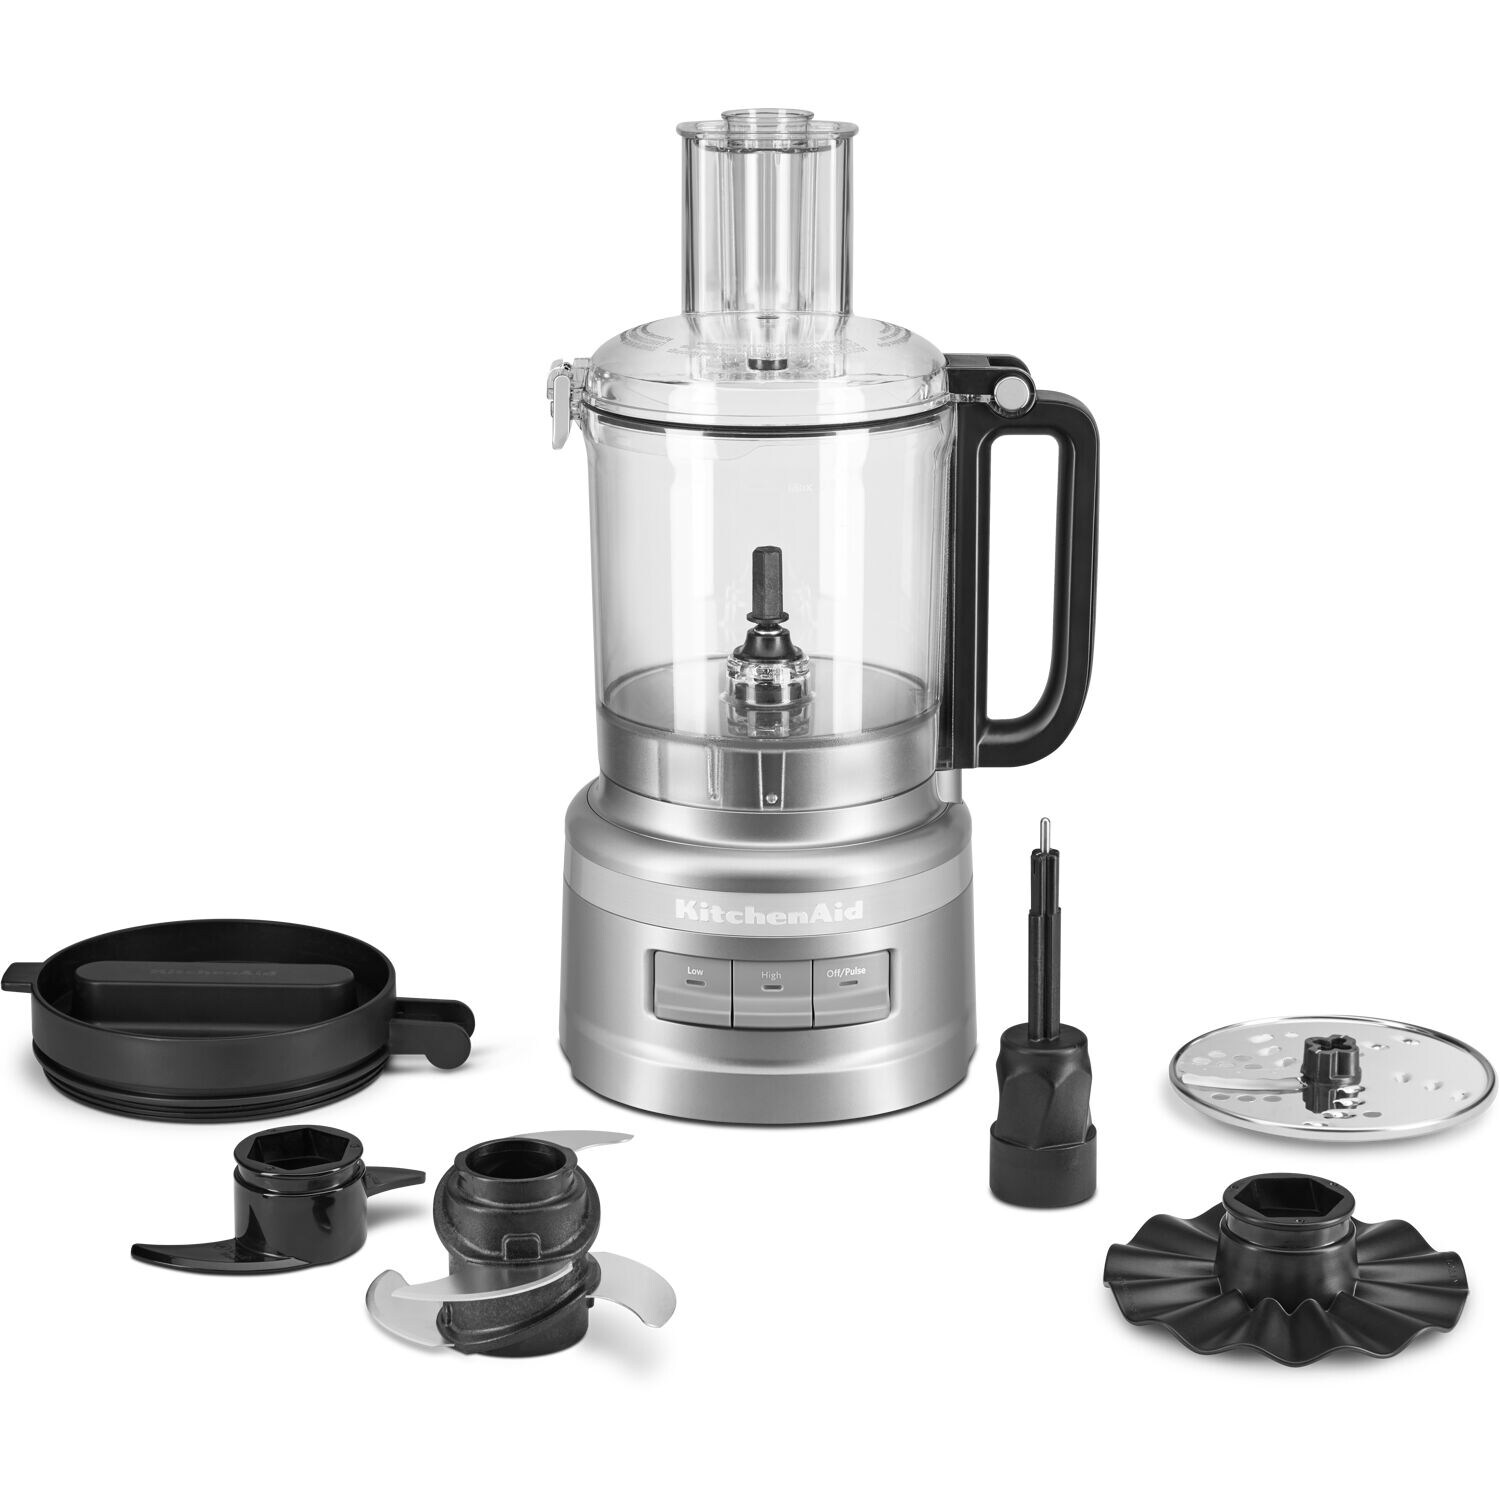 https://ak1.ostkcdn.com/images/products/is/images/direct/4bec8c9a3fd2b22cdf266f0ed942e96196416c45/KitchenAid-9-Cup-Food-Processor-in-Contour-Silver.jpg